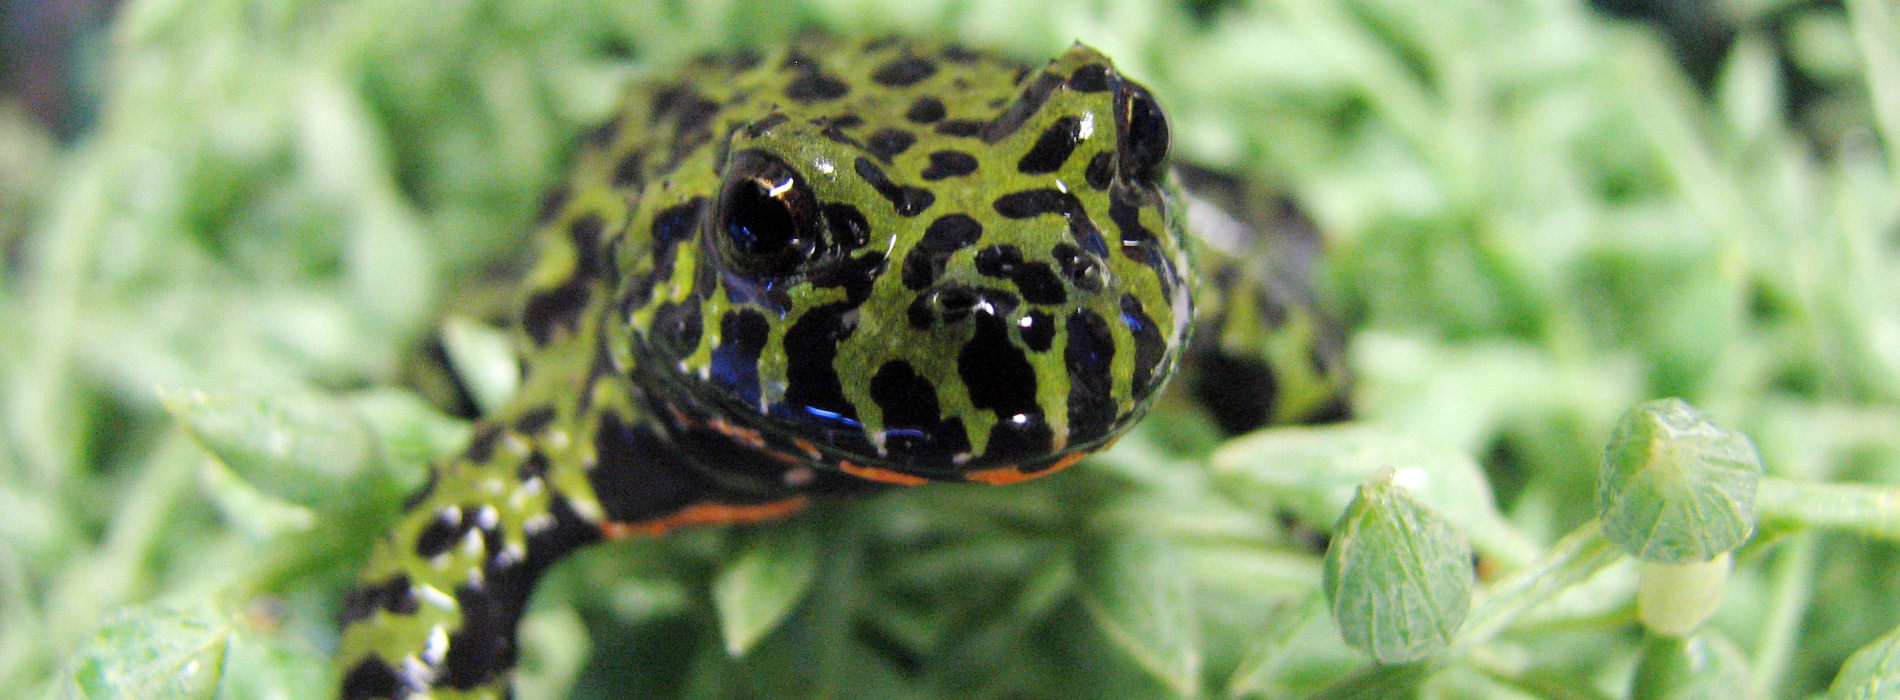 Oriental Fire Bellied Toad hiding in aquatic green plant